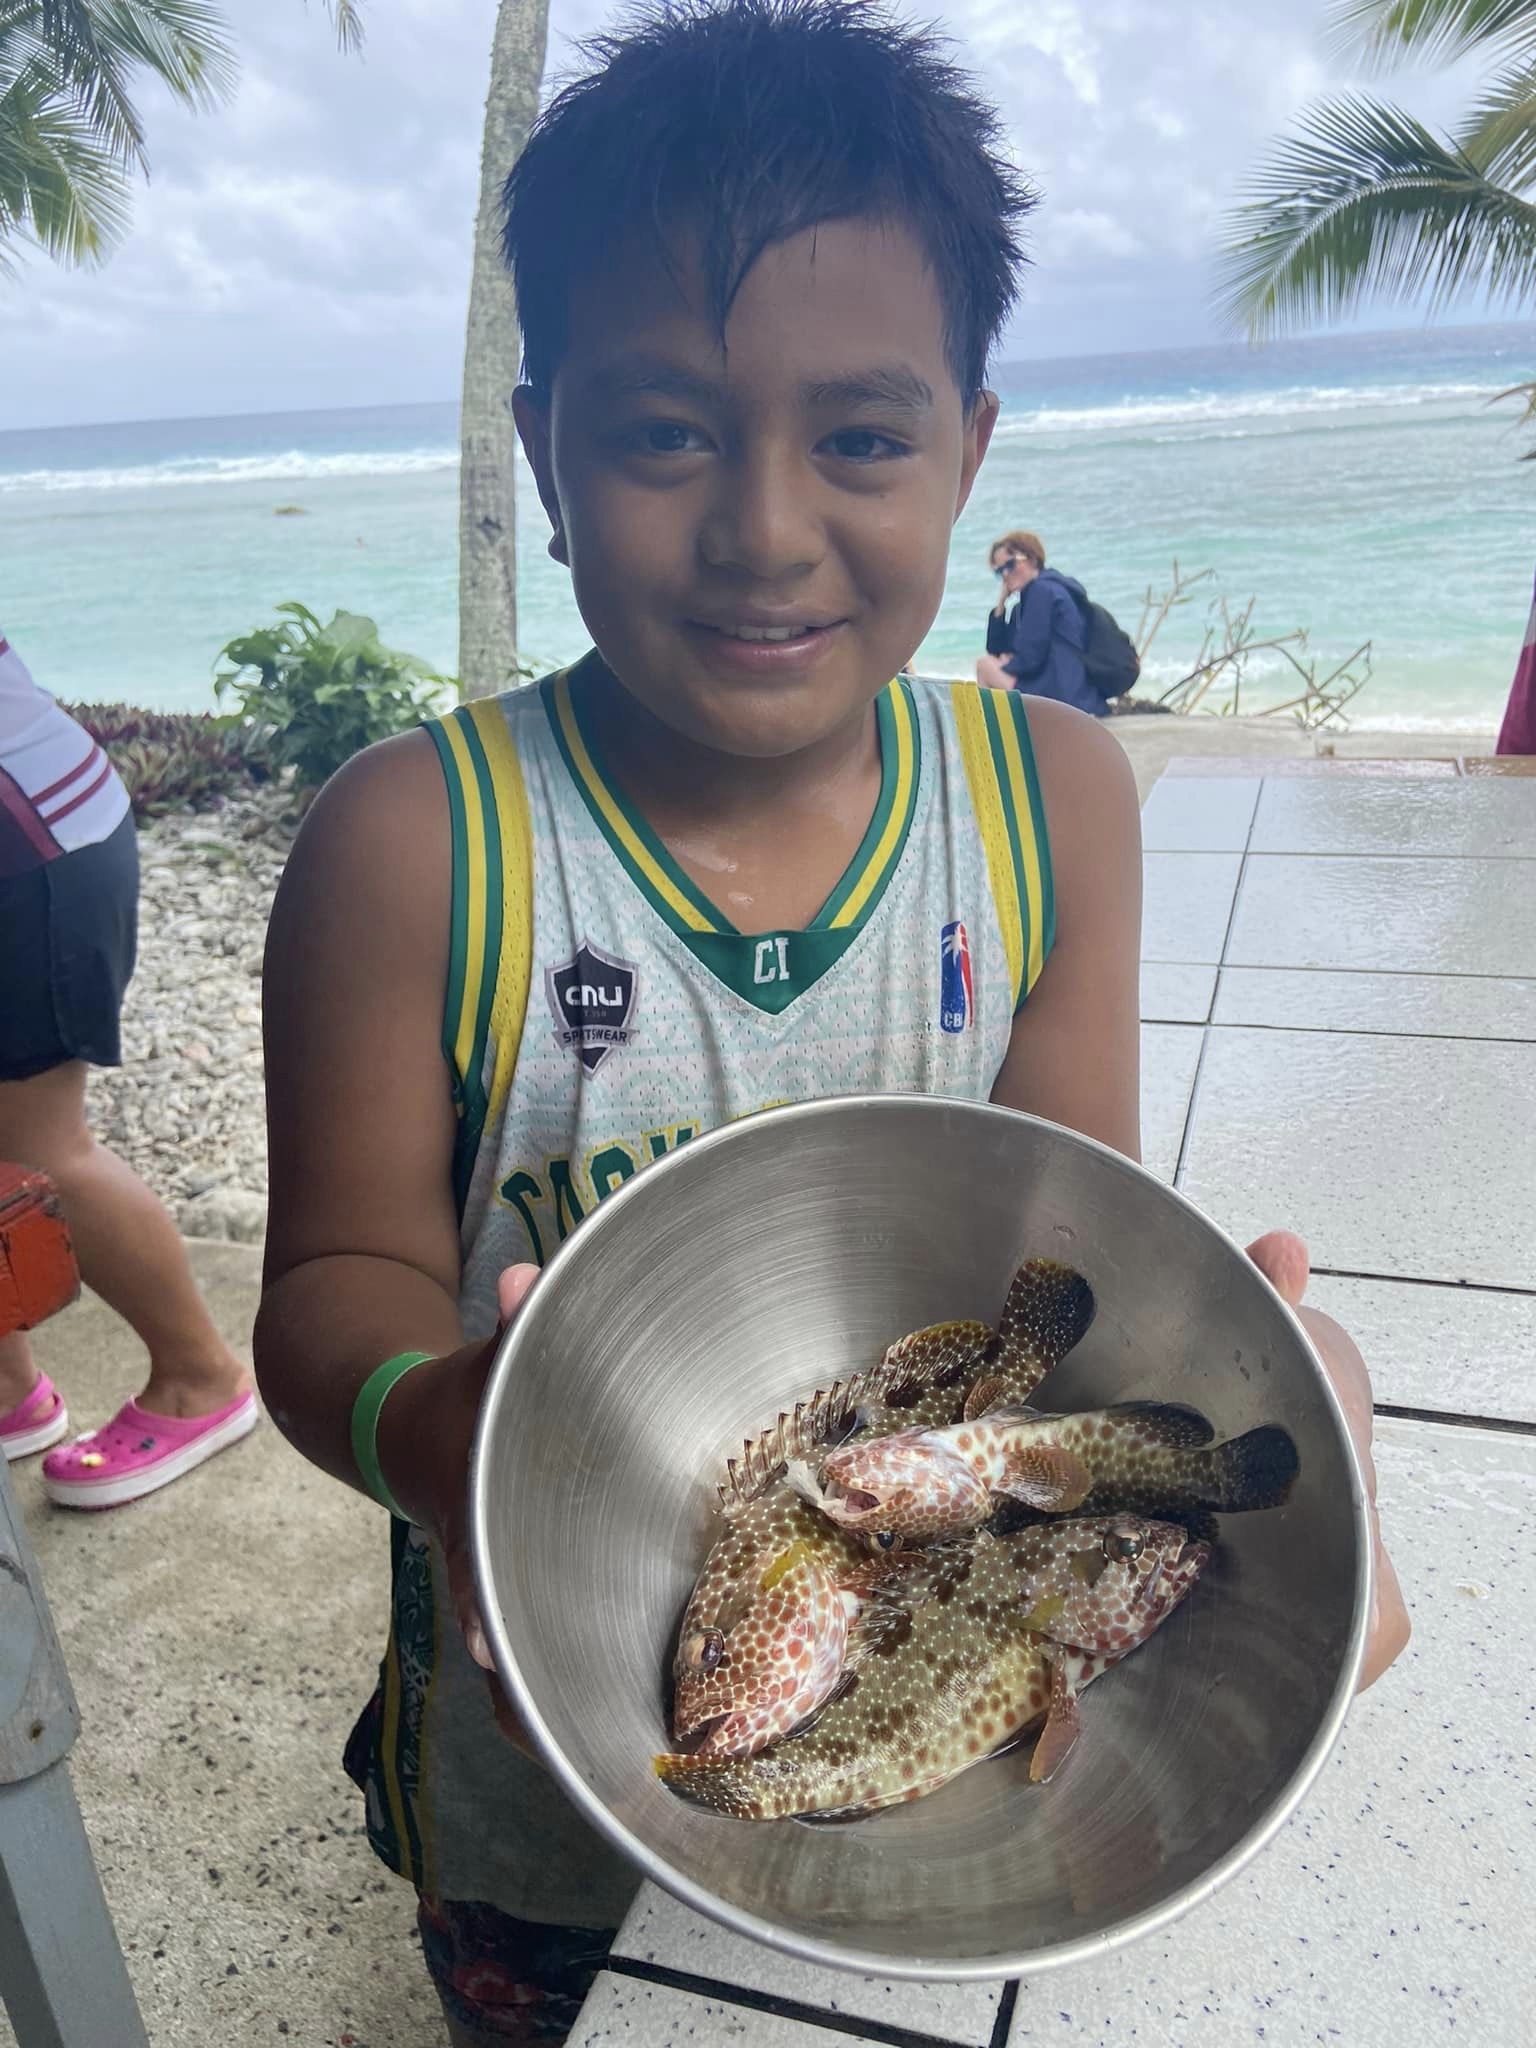 A reel deal: Participants get hooked on fun at Annual Reef Fishing Competition